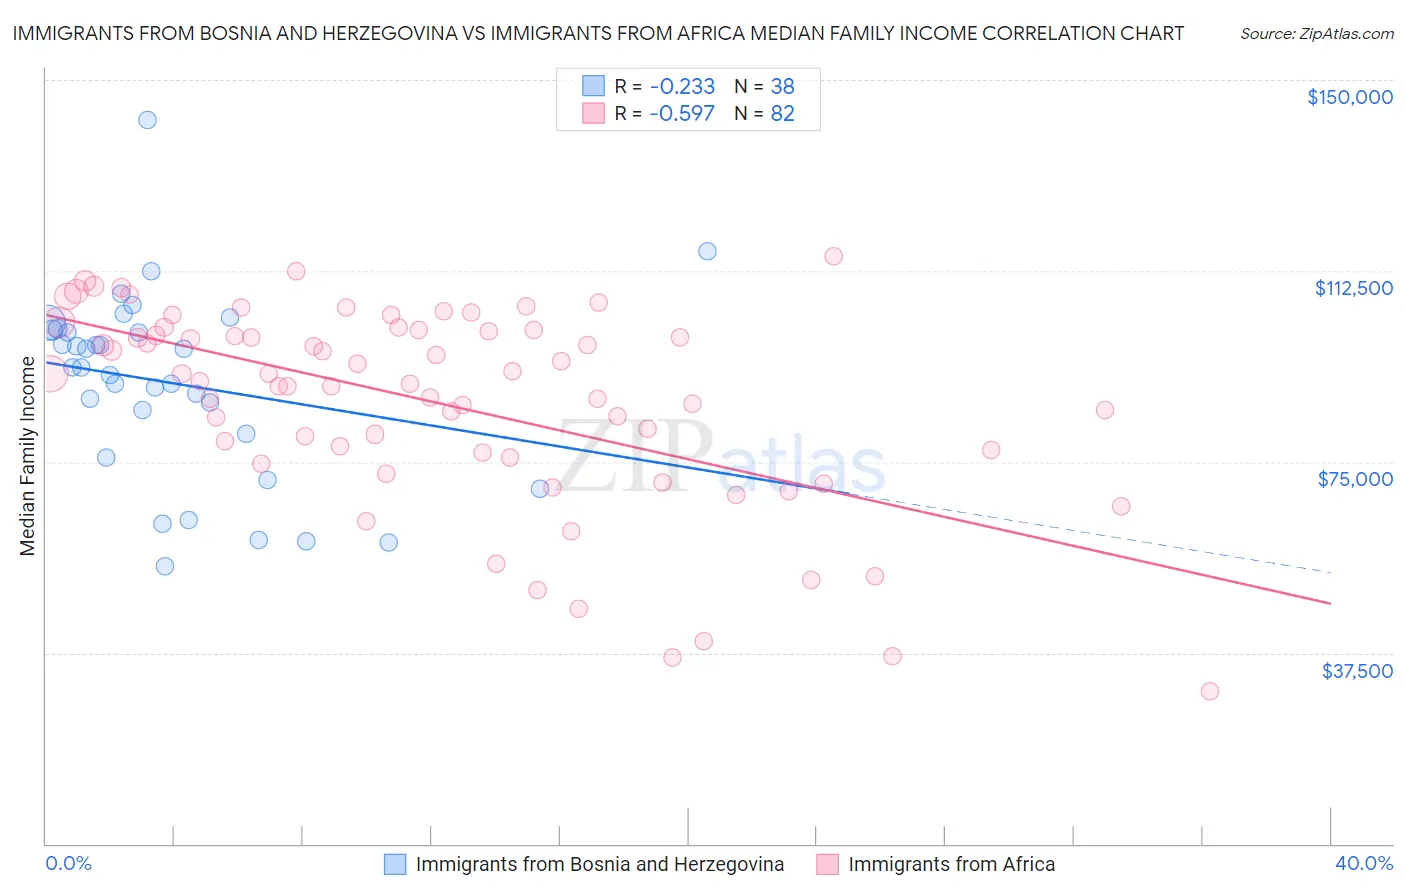 Immigrants from Bosnia and Herzegovina vs Immigrants from Africa Median Family Income